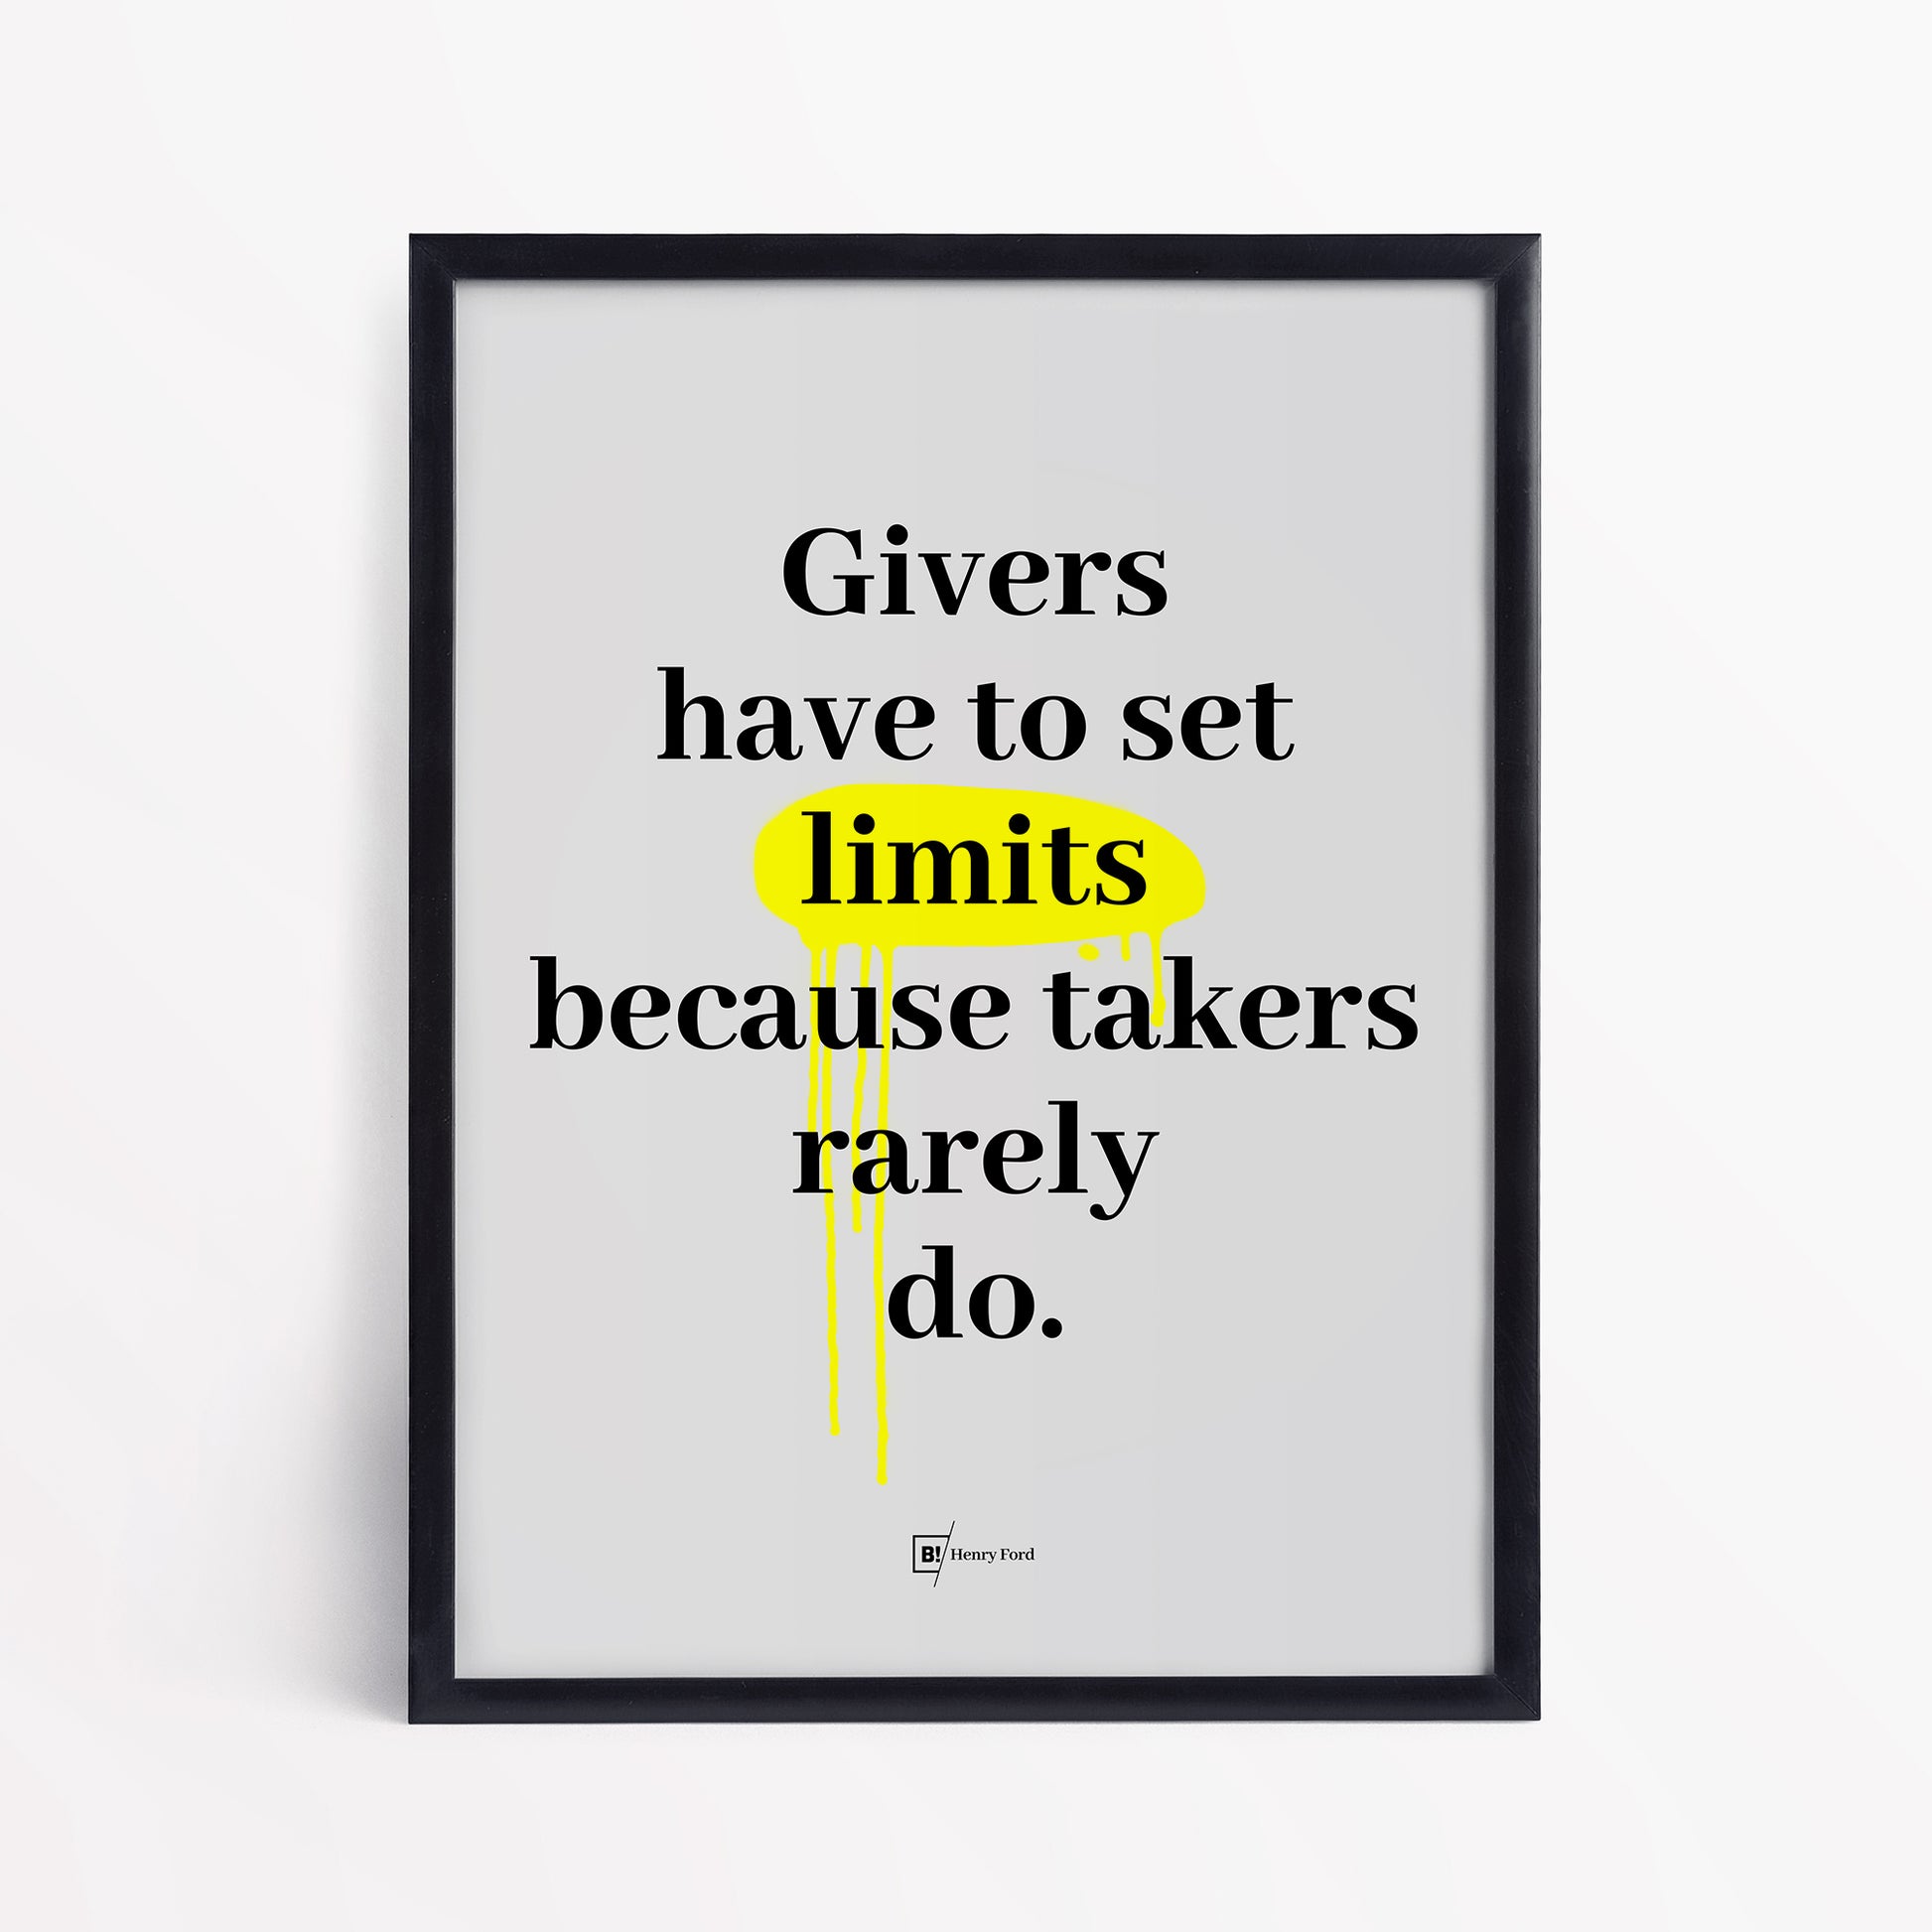 Be inspired by Henry Ford's famous "Givers have to set limits because takers rarely do" quote art print. This artwork was printed using the giclée process on archival acid-free paper and is presented in a simple black frame that captures its timeless beauty in every detail.